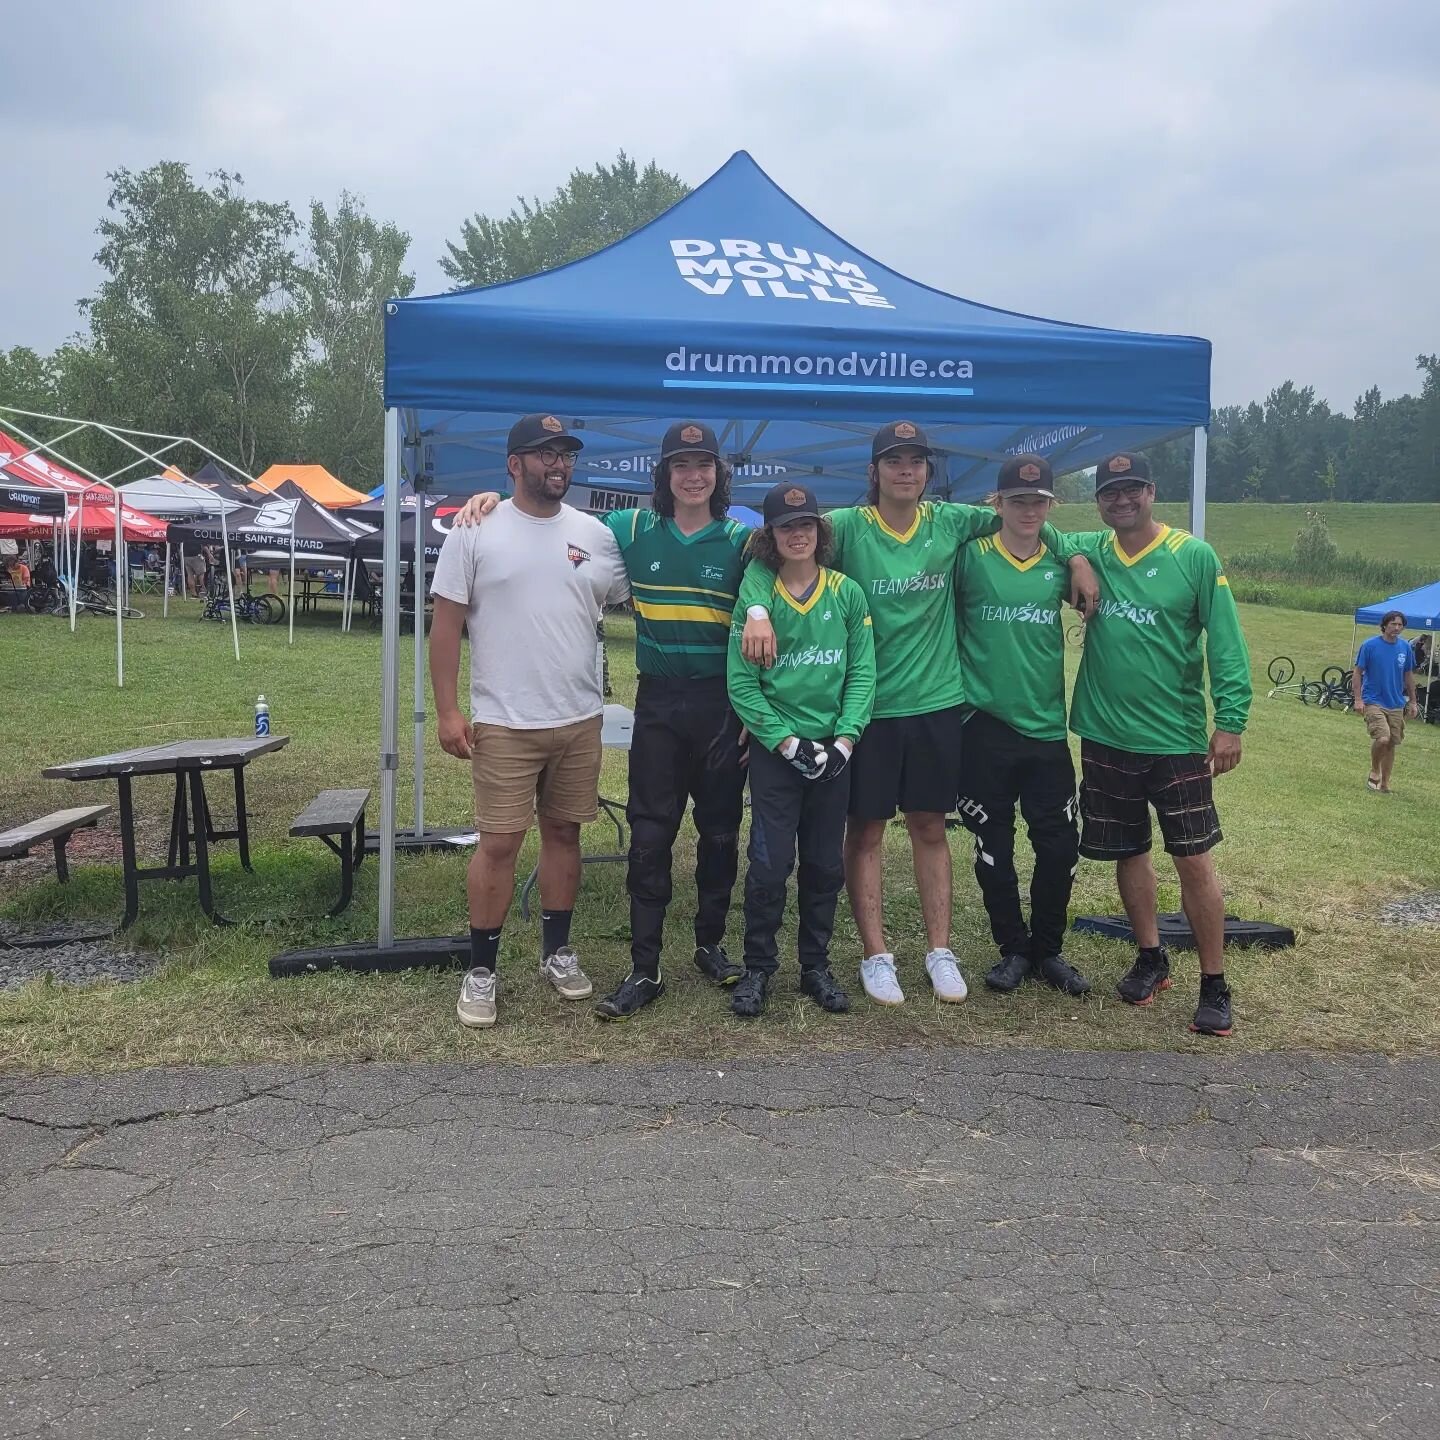 Another great day in Drummondville, Quebec for Team Sask!!! To the Team Sask Members we witnessed amazing growth in you all. Very proud of you guys!  Thanks to Coach Kiran Kawa of @otbclinics for all the guidance throughout both races. 

Congrats to 